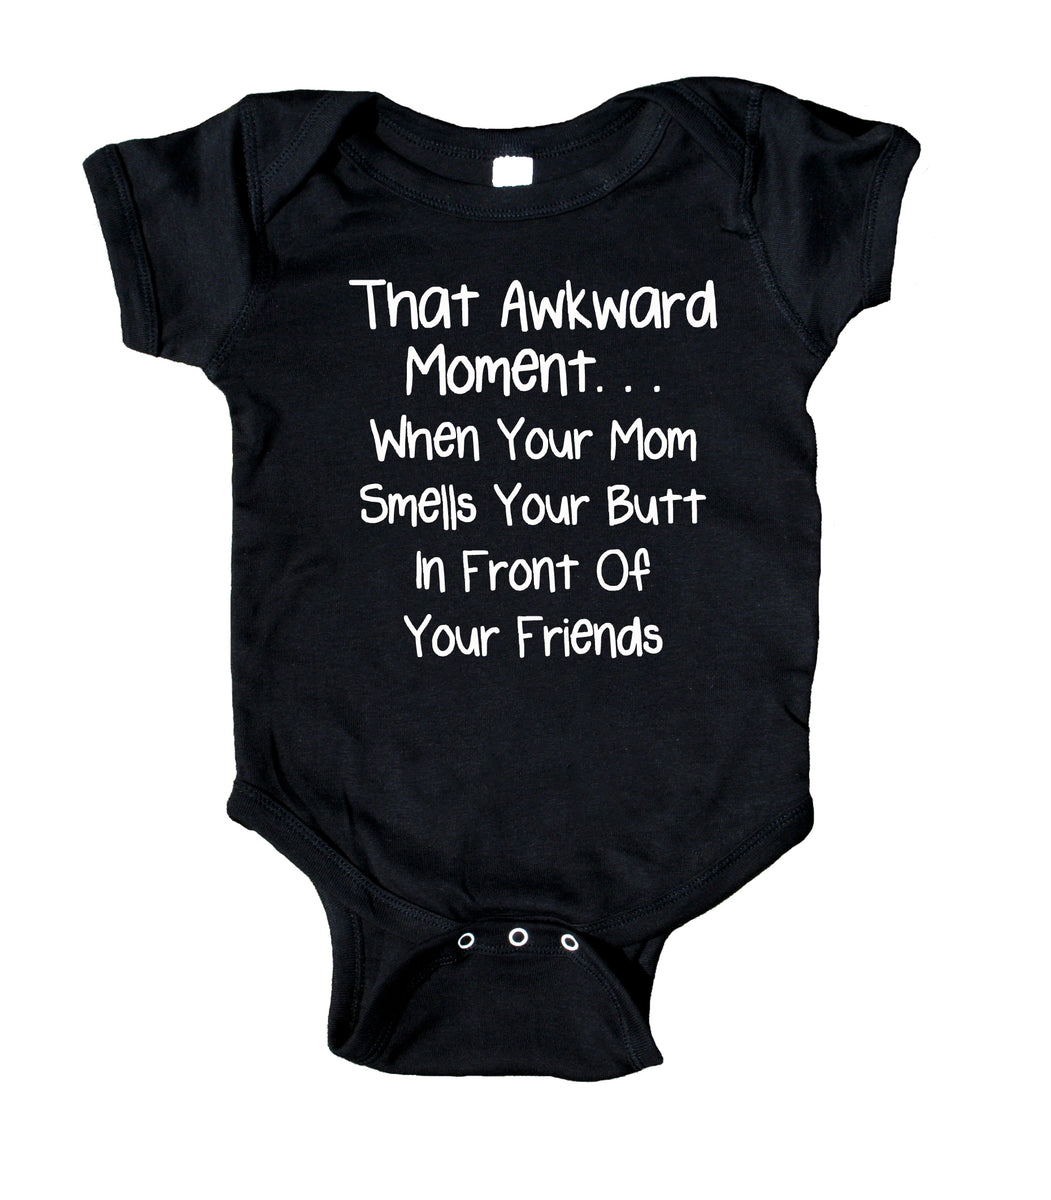 That Awkward Moment... Baby Bodysuit Funny Cute Awesome Newborn Infant ...